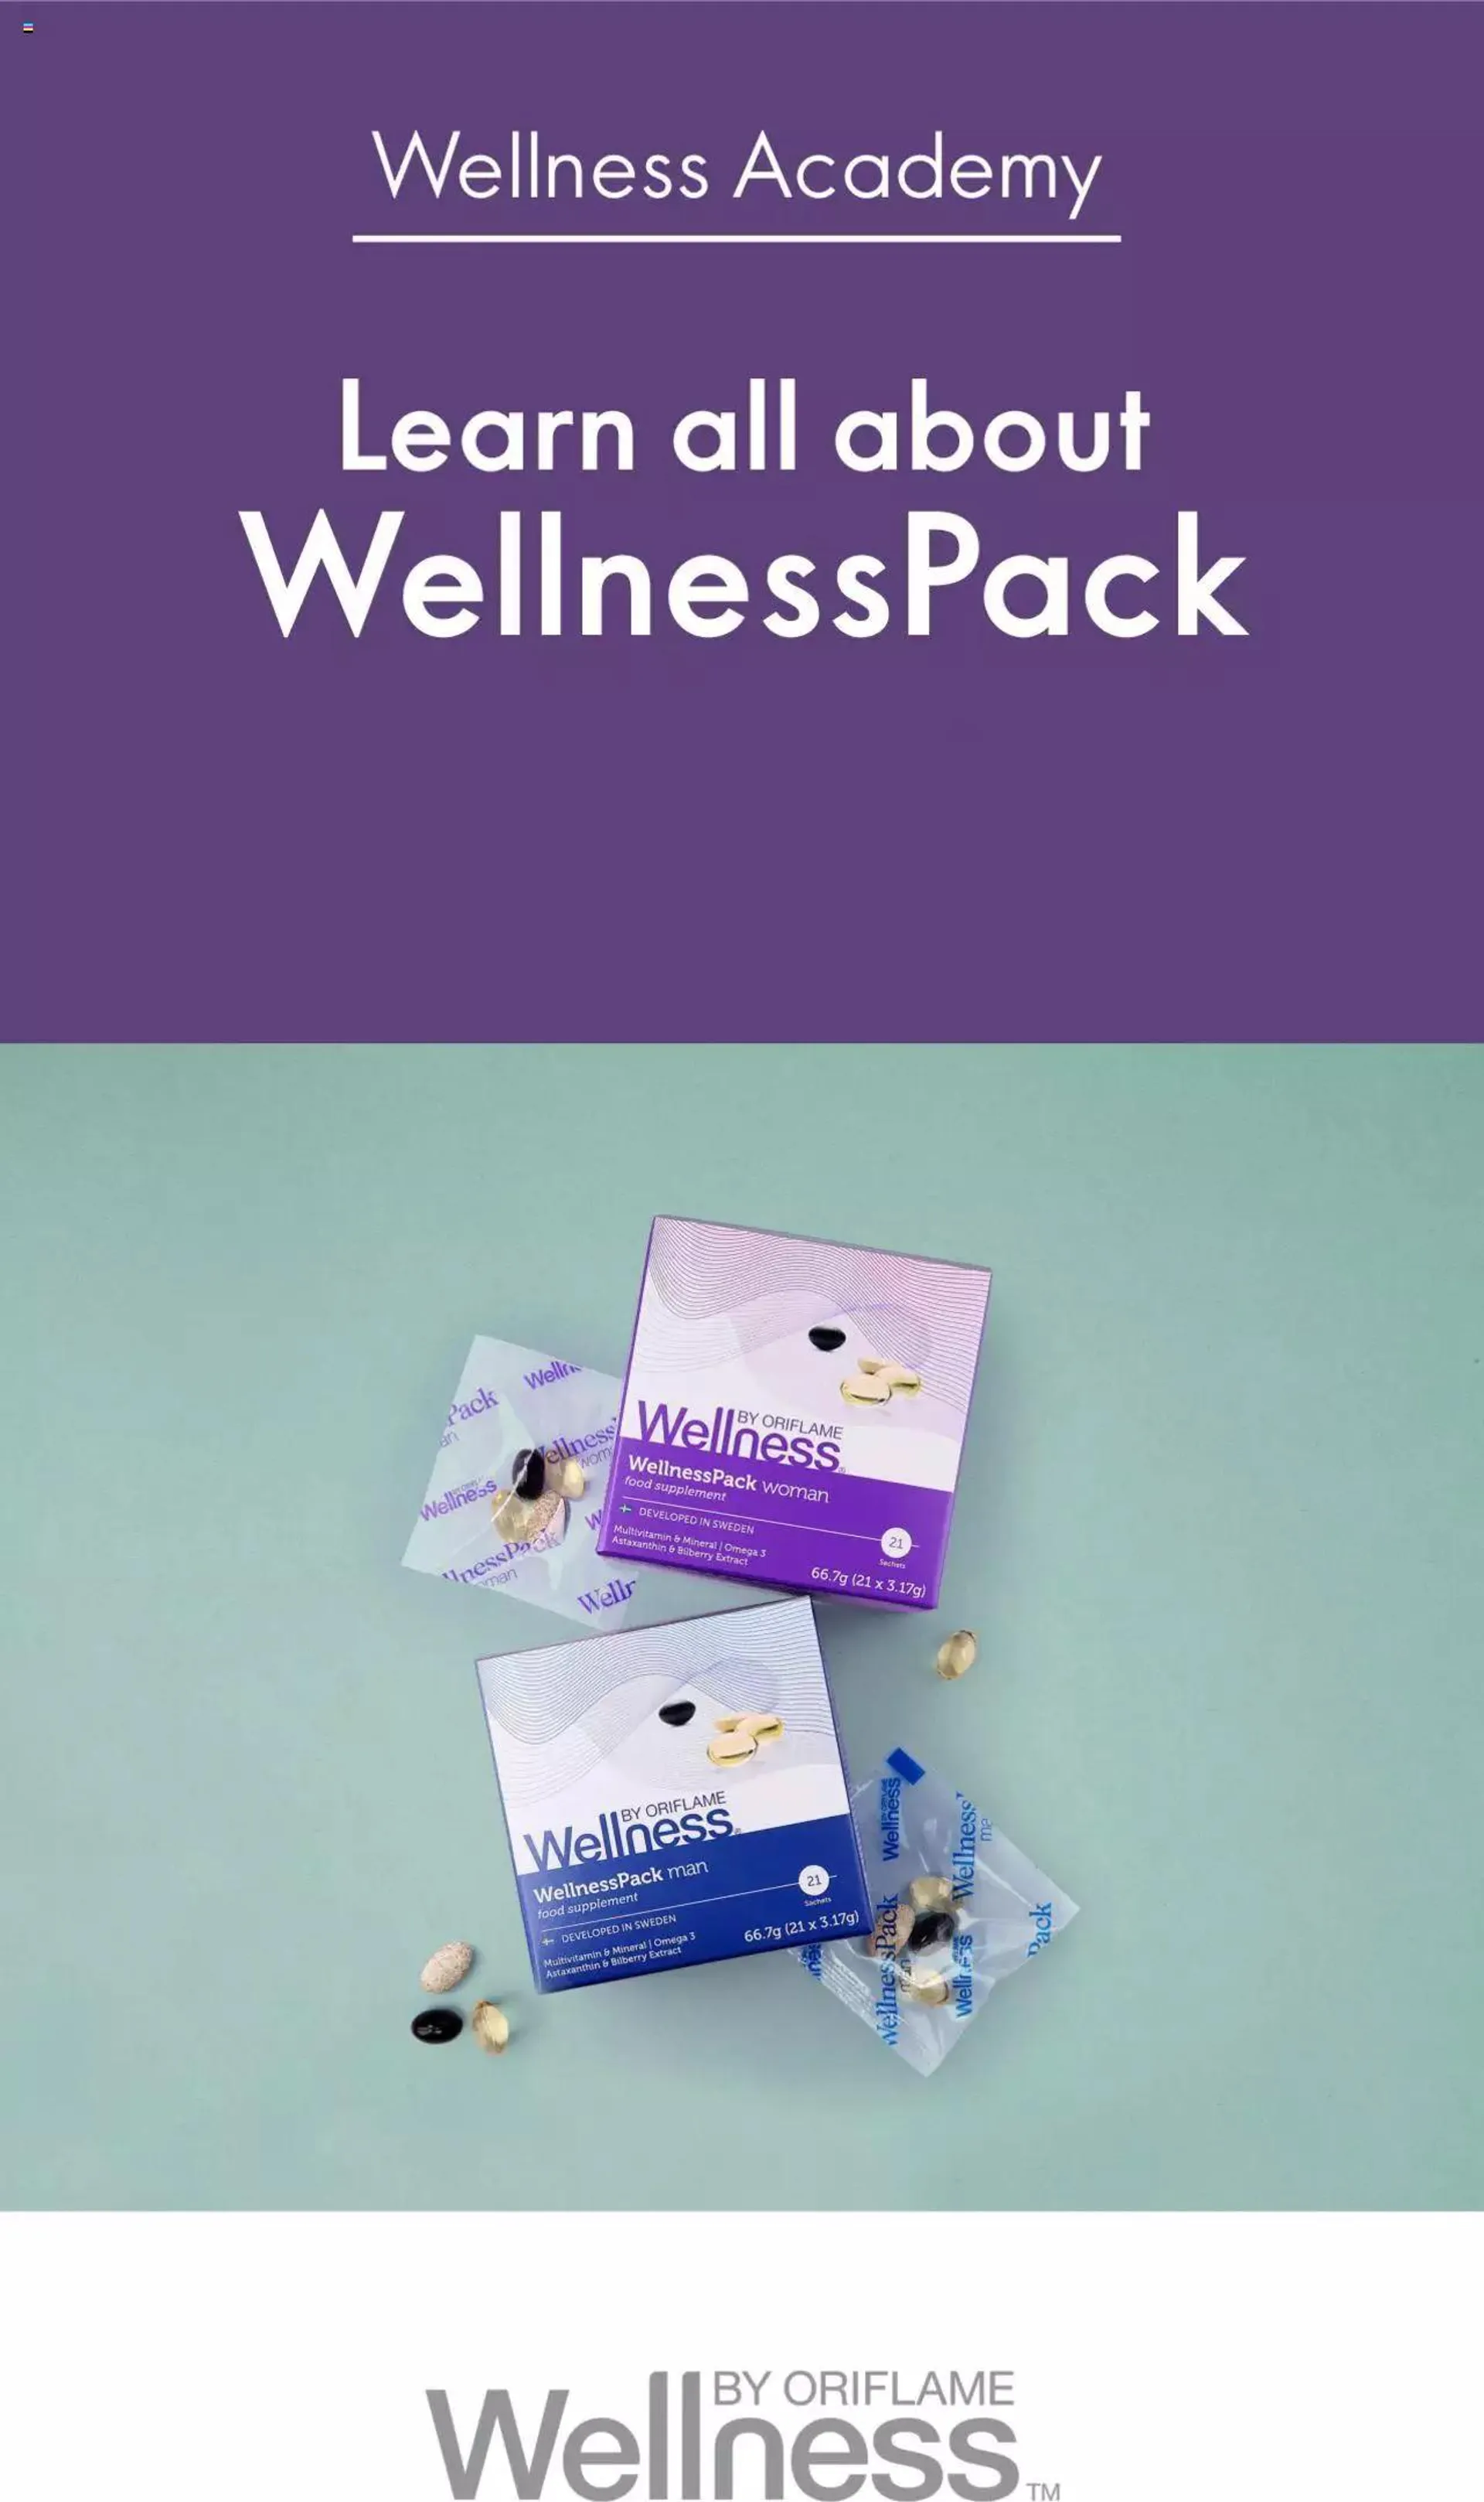 Oriflame - Learn all about WellnessPack - 0